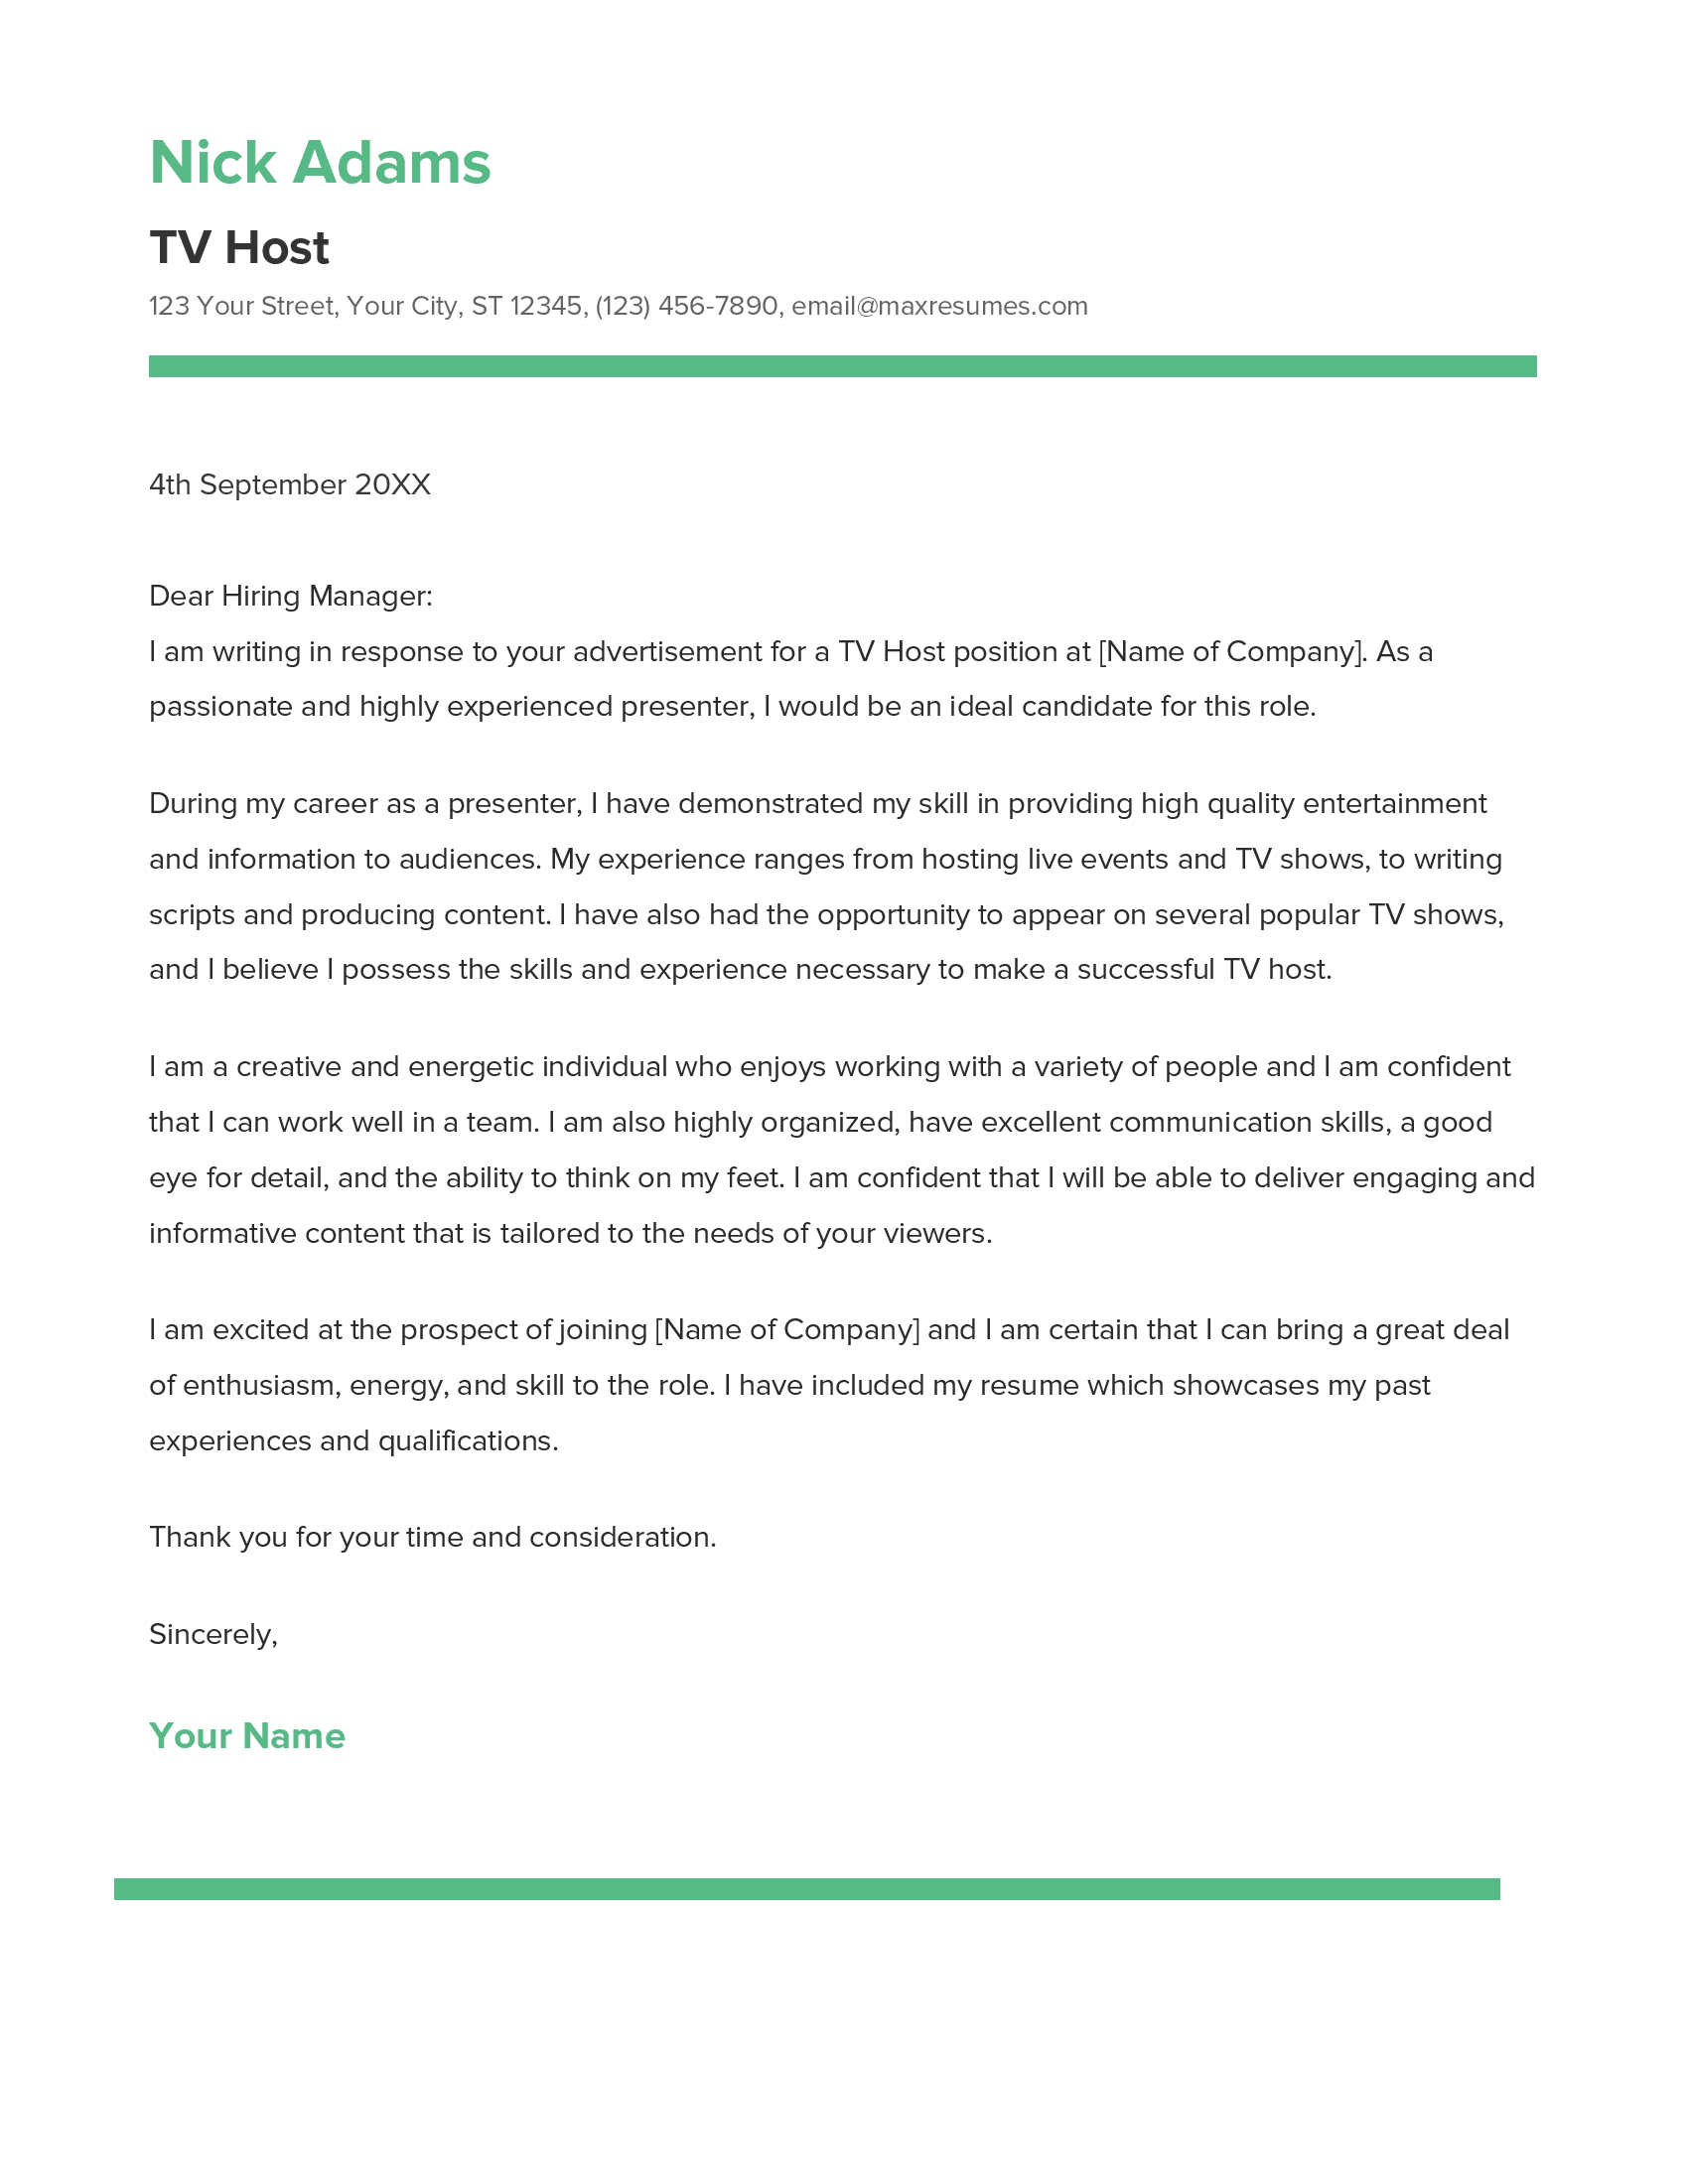 TV Host Cover Letter Example